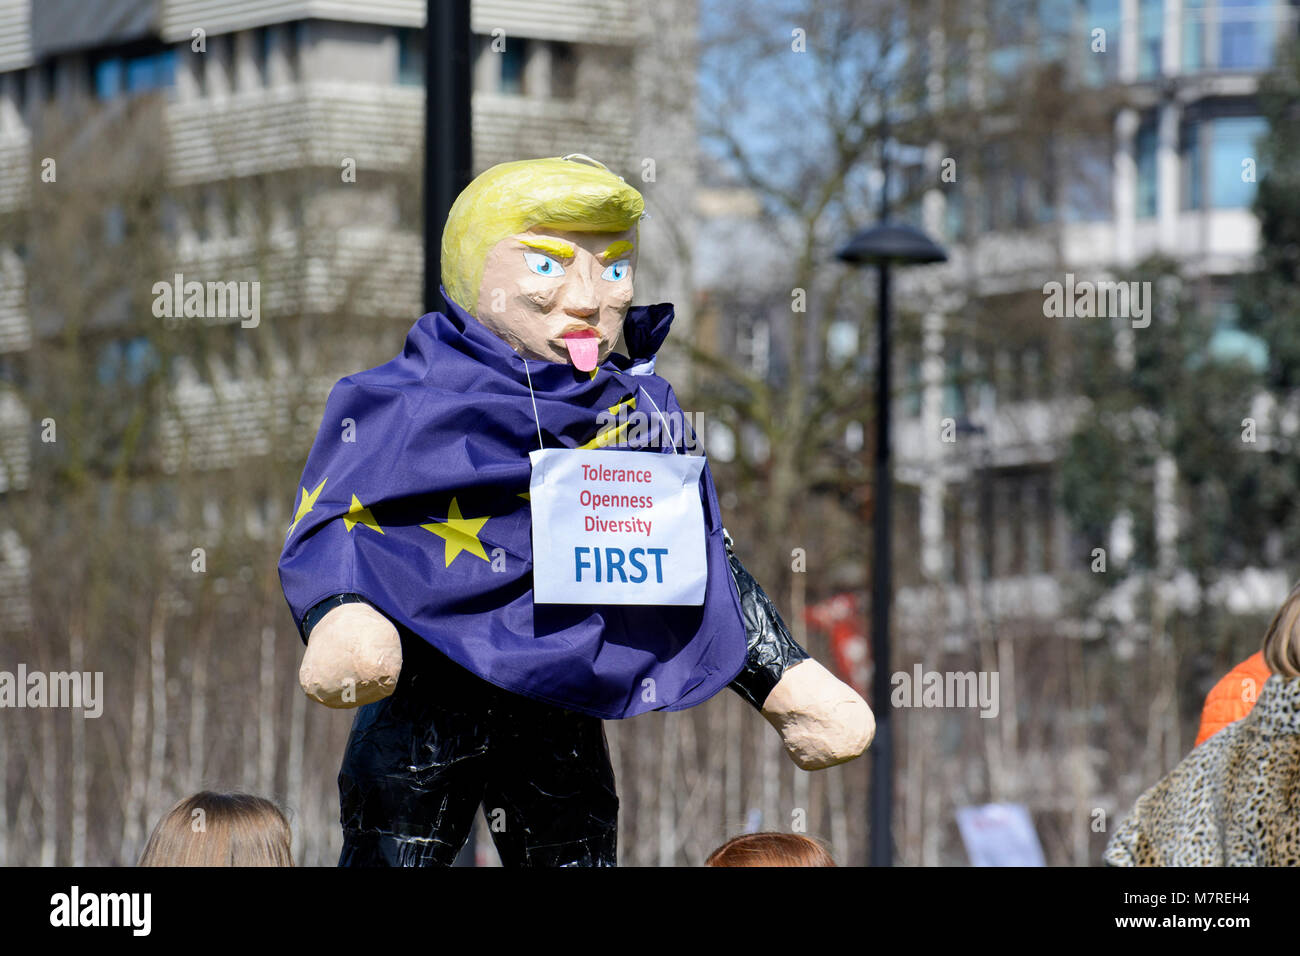 Donald Trump effigy wearing EU flag and carrying a placard reading 'Tolerance Openness Diversity First' at the Unite for Europe march in London, UK. Stock Photo